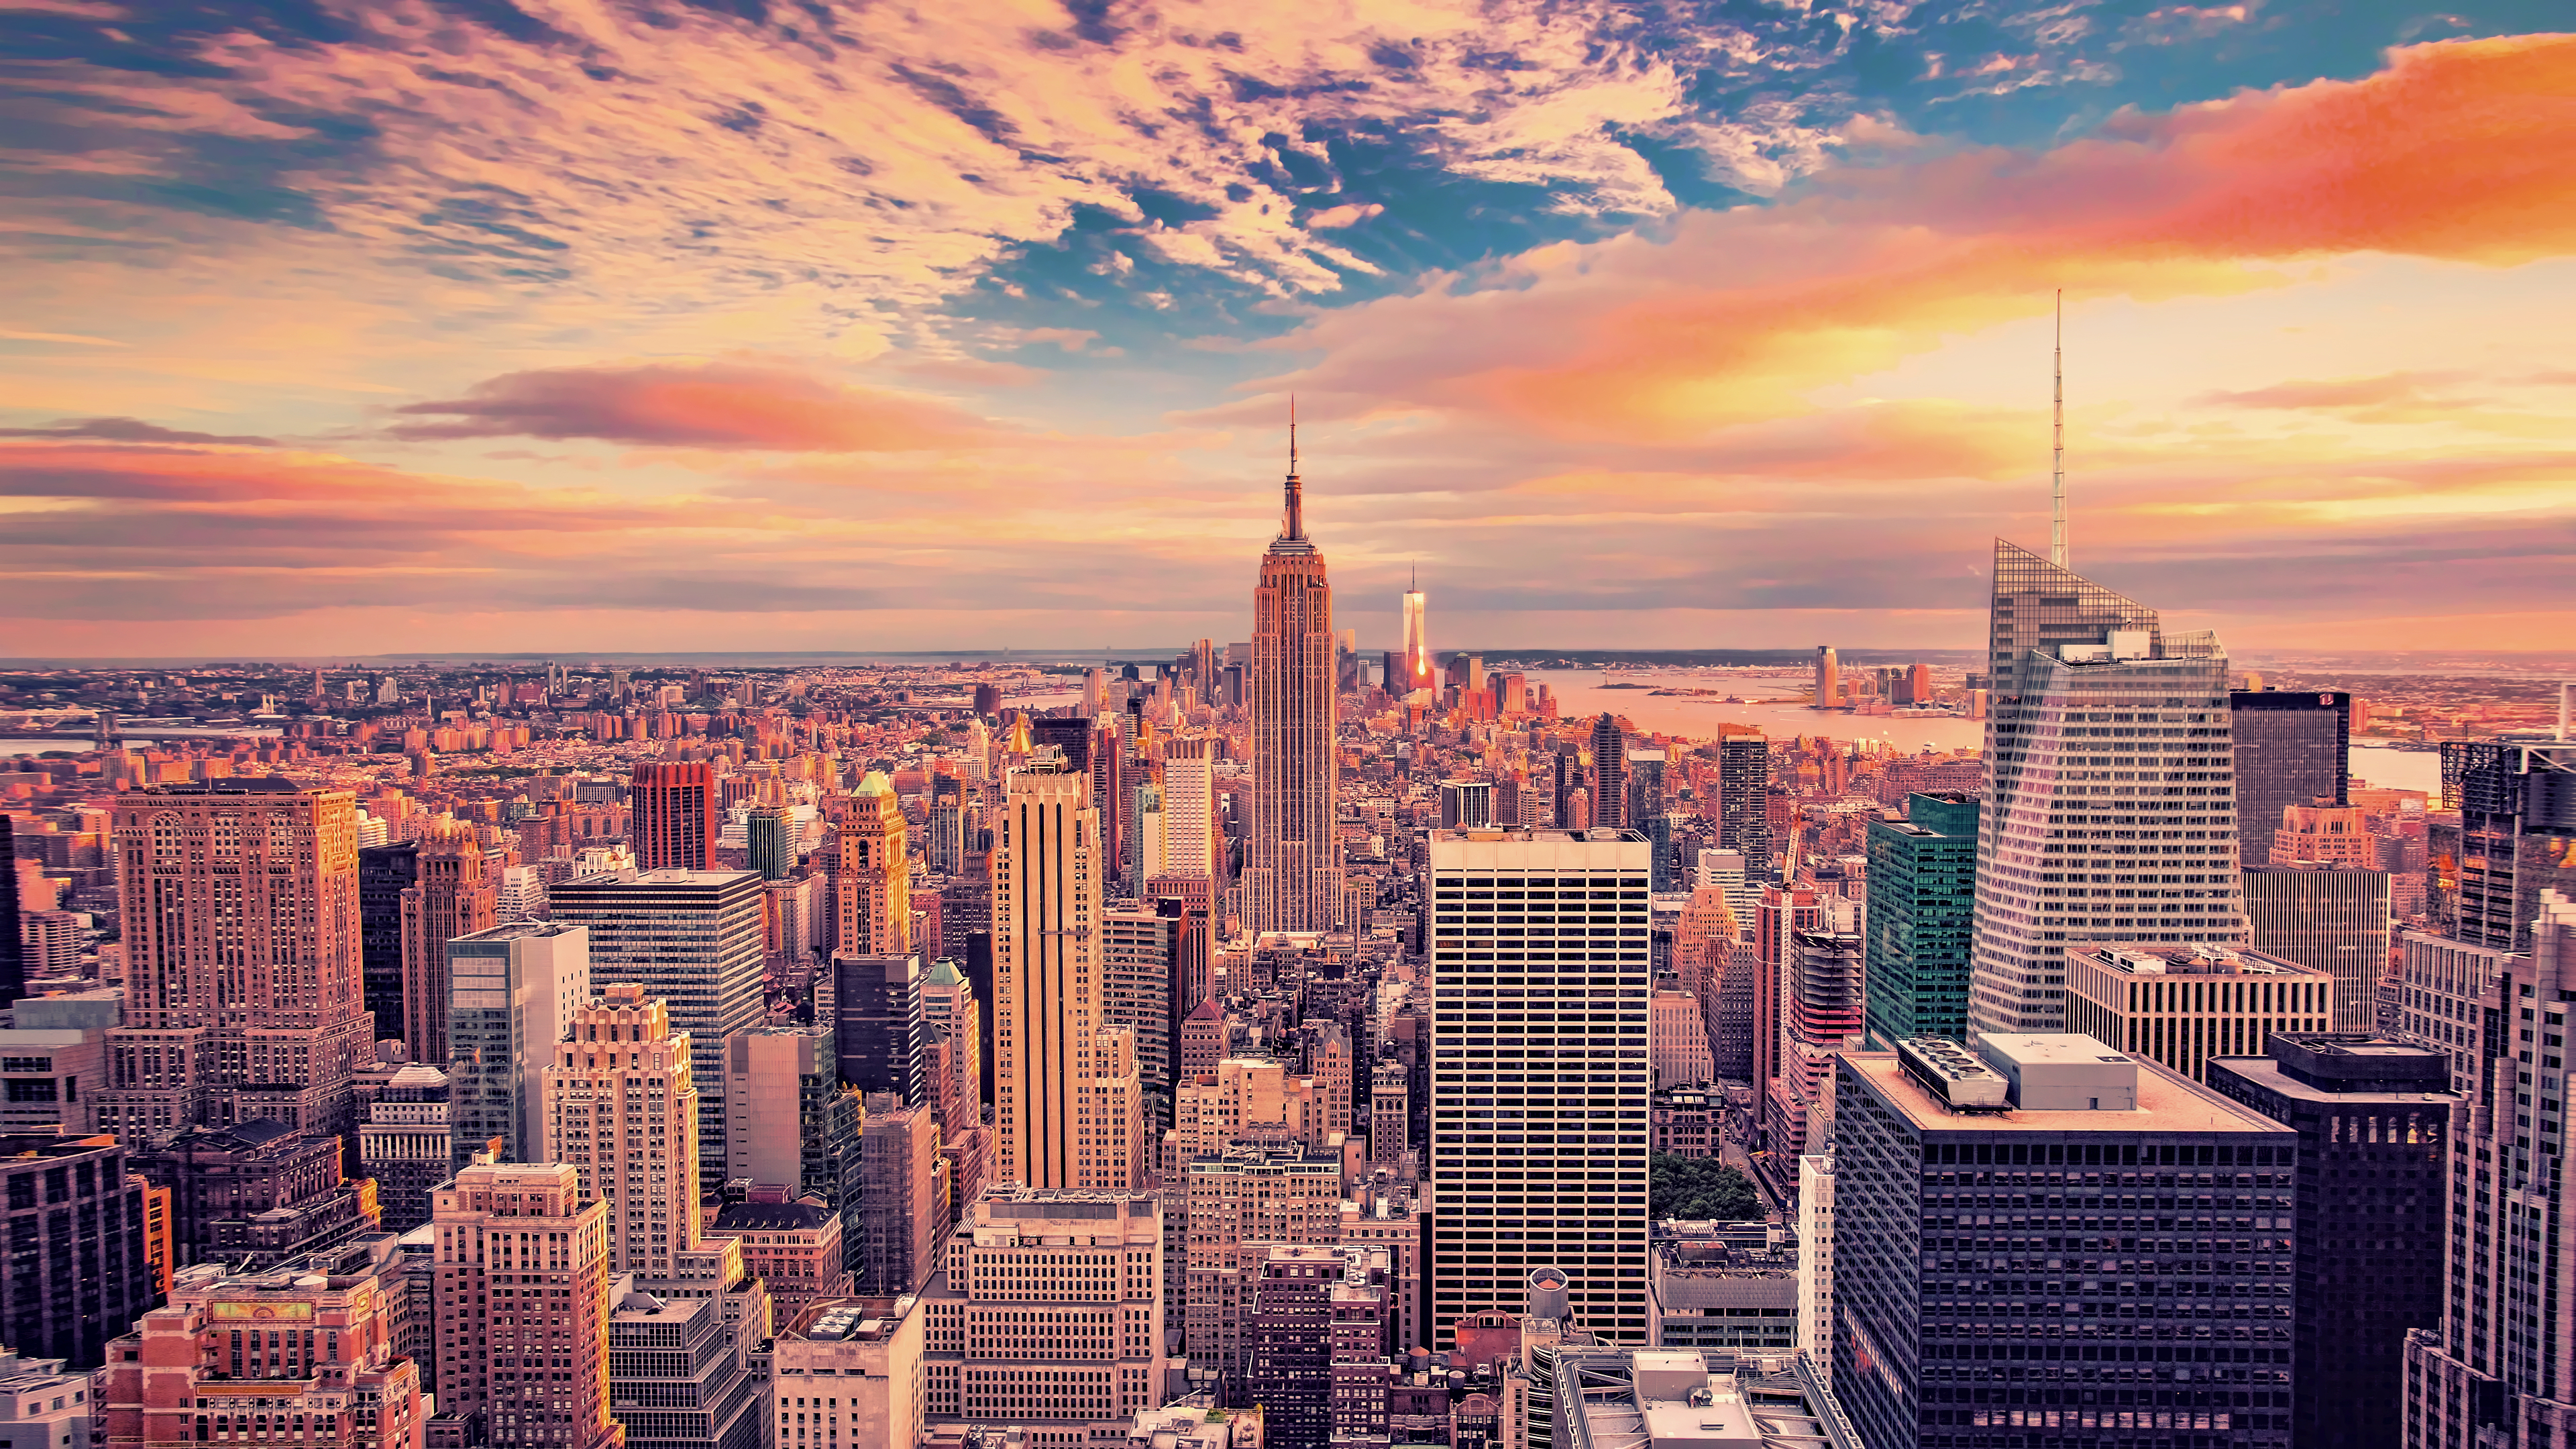 General 3840x2160 New York City cityscape city USA Empire State Building landscape clouds